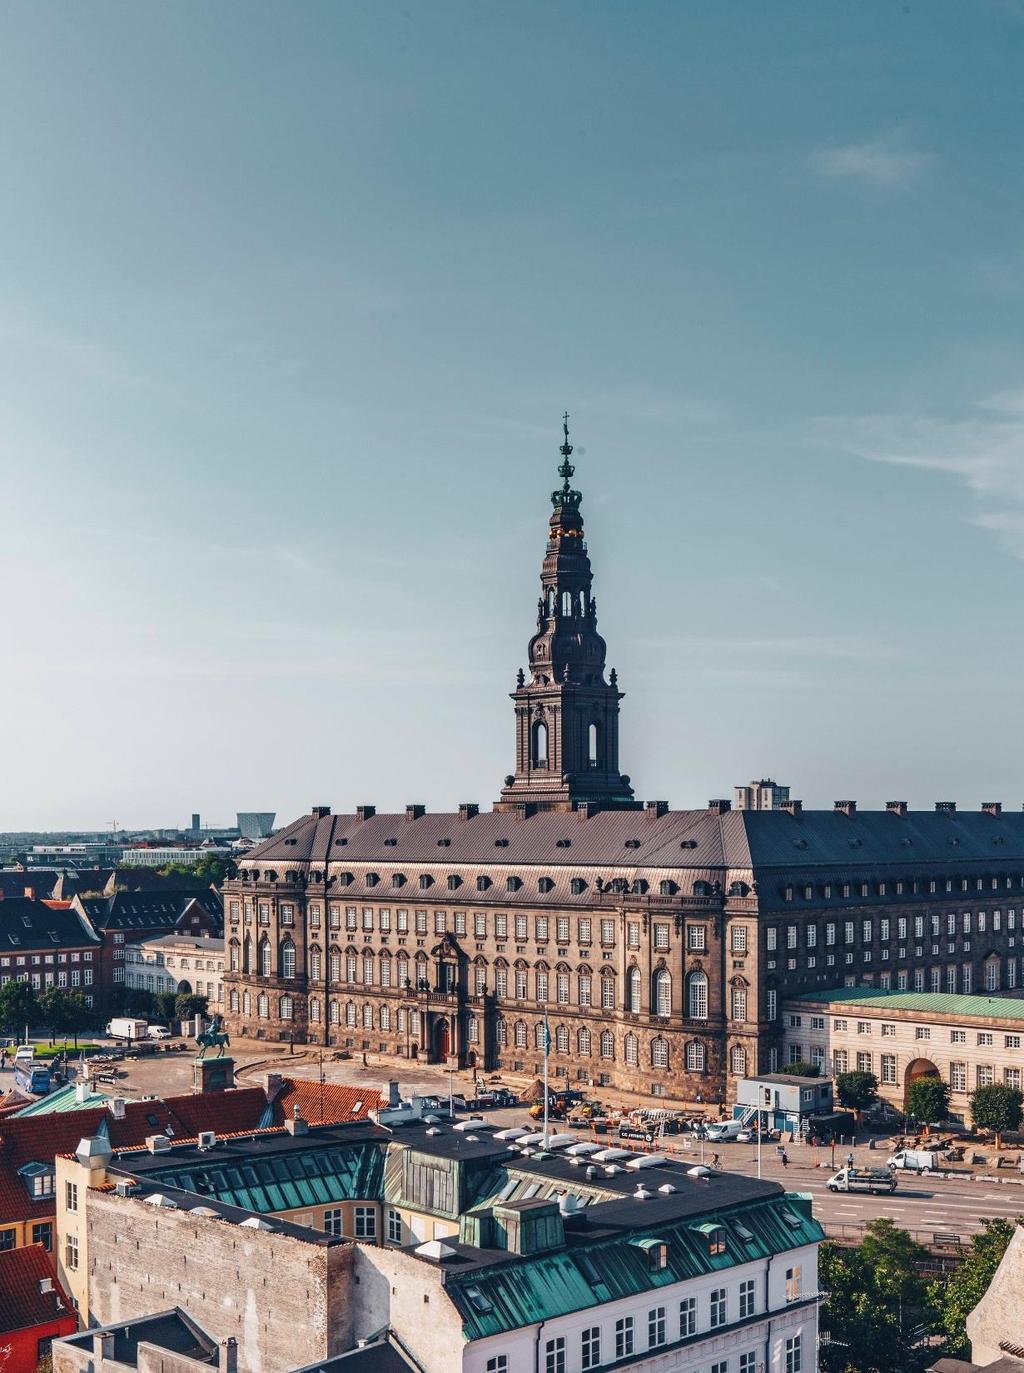 EXPLORE COPENHAGEN FREE ENTRANCE TO CHRISTIANSBORG PALACE This is where presidents and kings dine with the Queen in the grandiose Great Hall (Riddersalen).